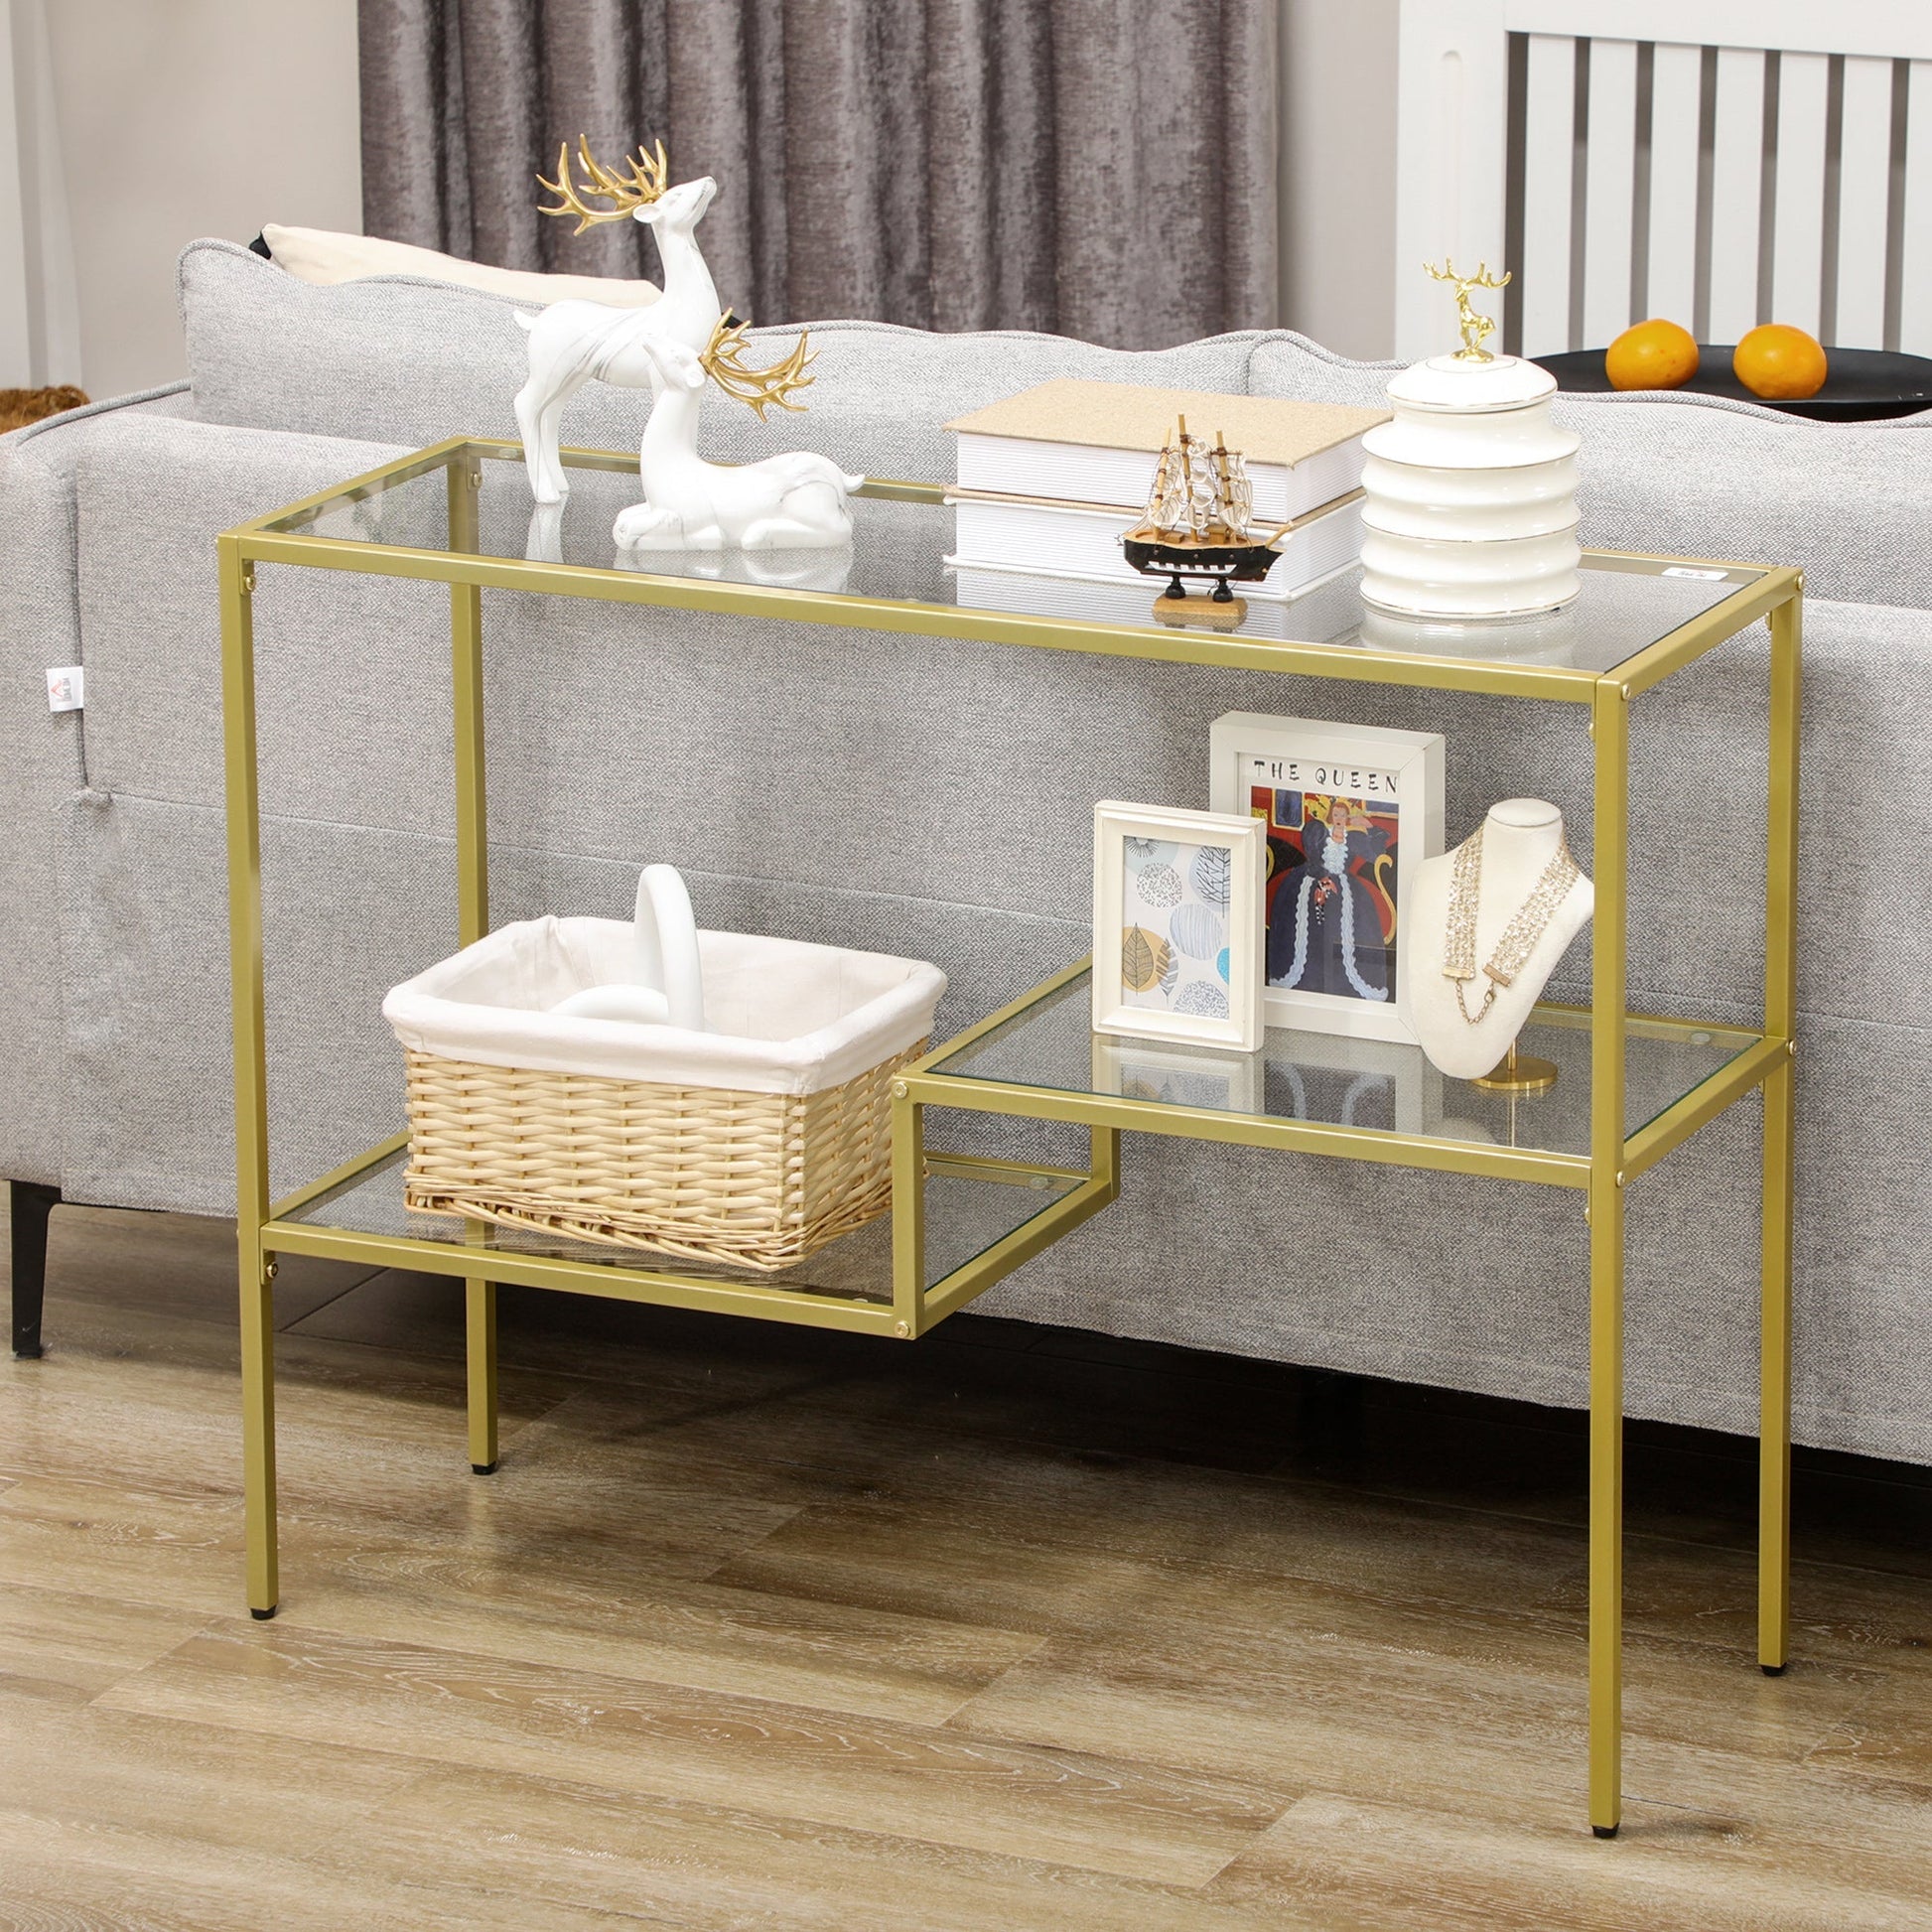 Gold Console Table, 39" Tempered Glass Sofa Table, Narrow Entryway Table with Storage Shelves, Steel Frame for Living Room, Hallway at Gallery Canada